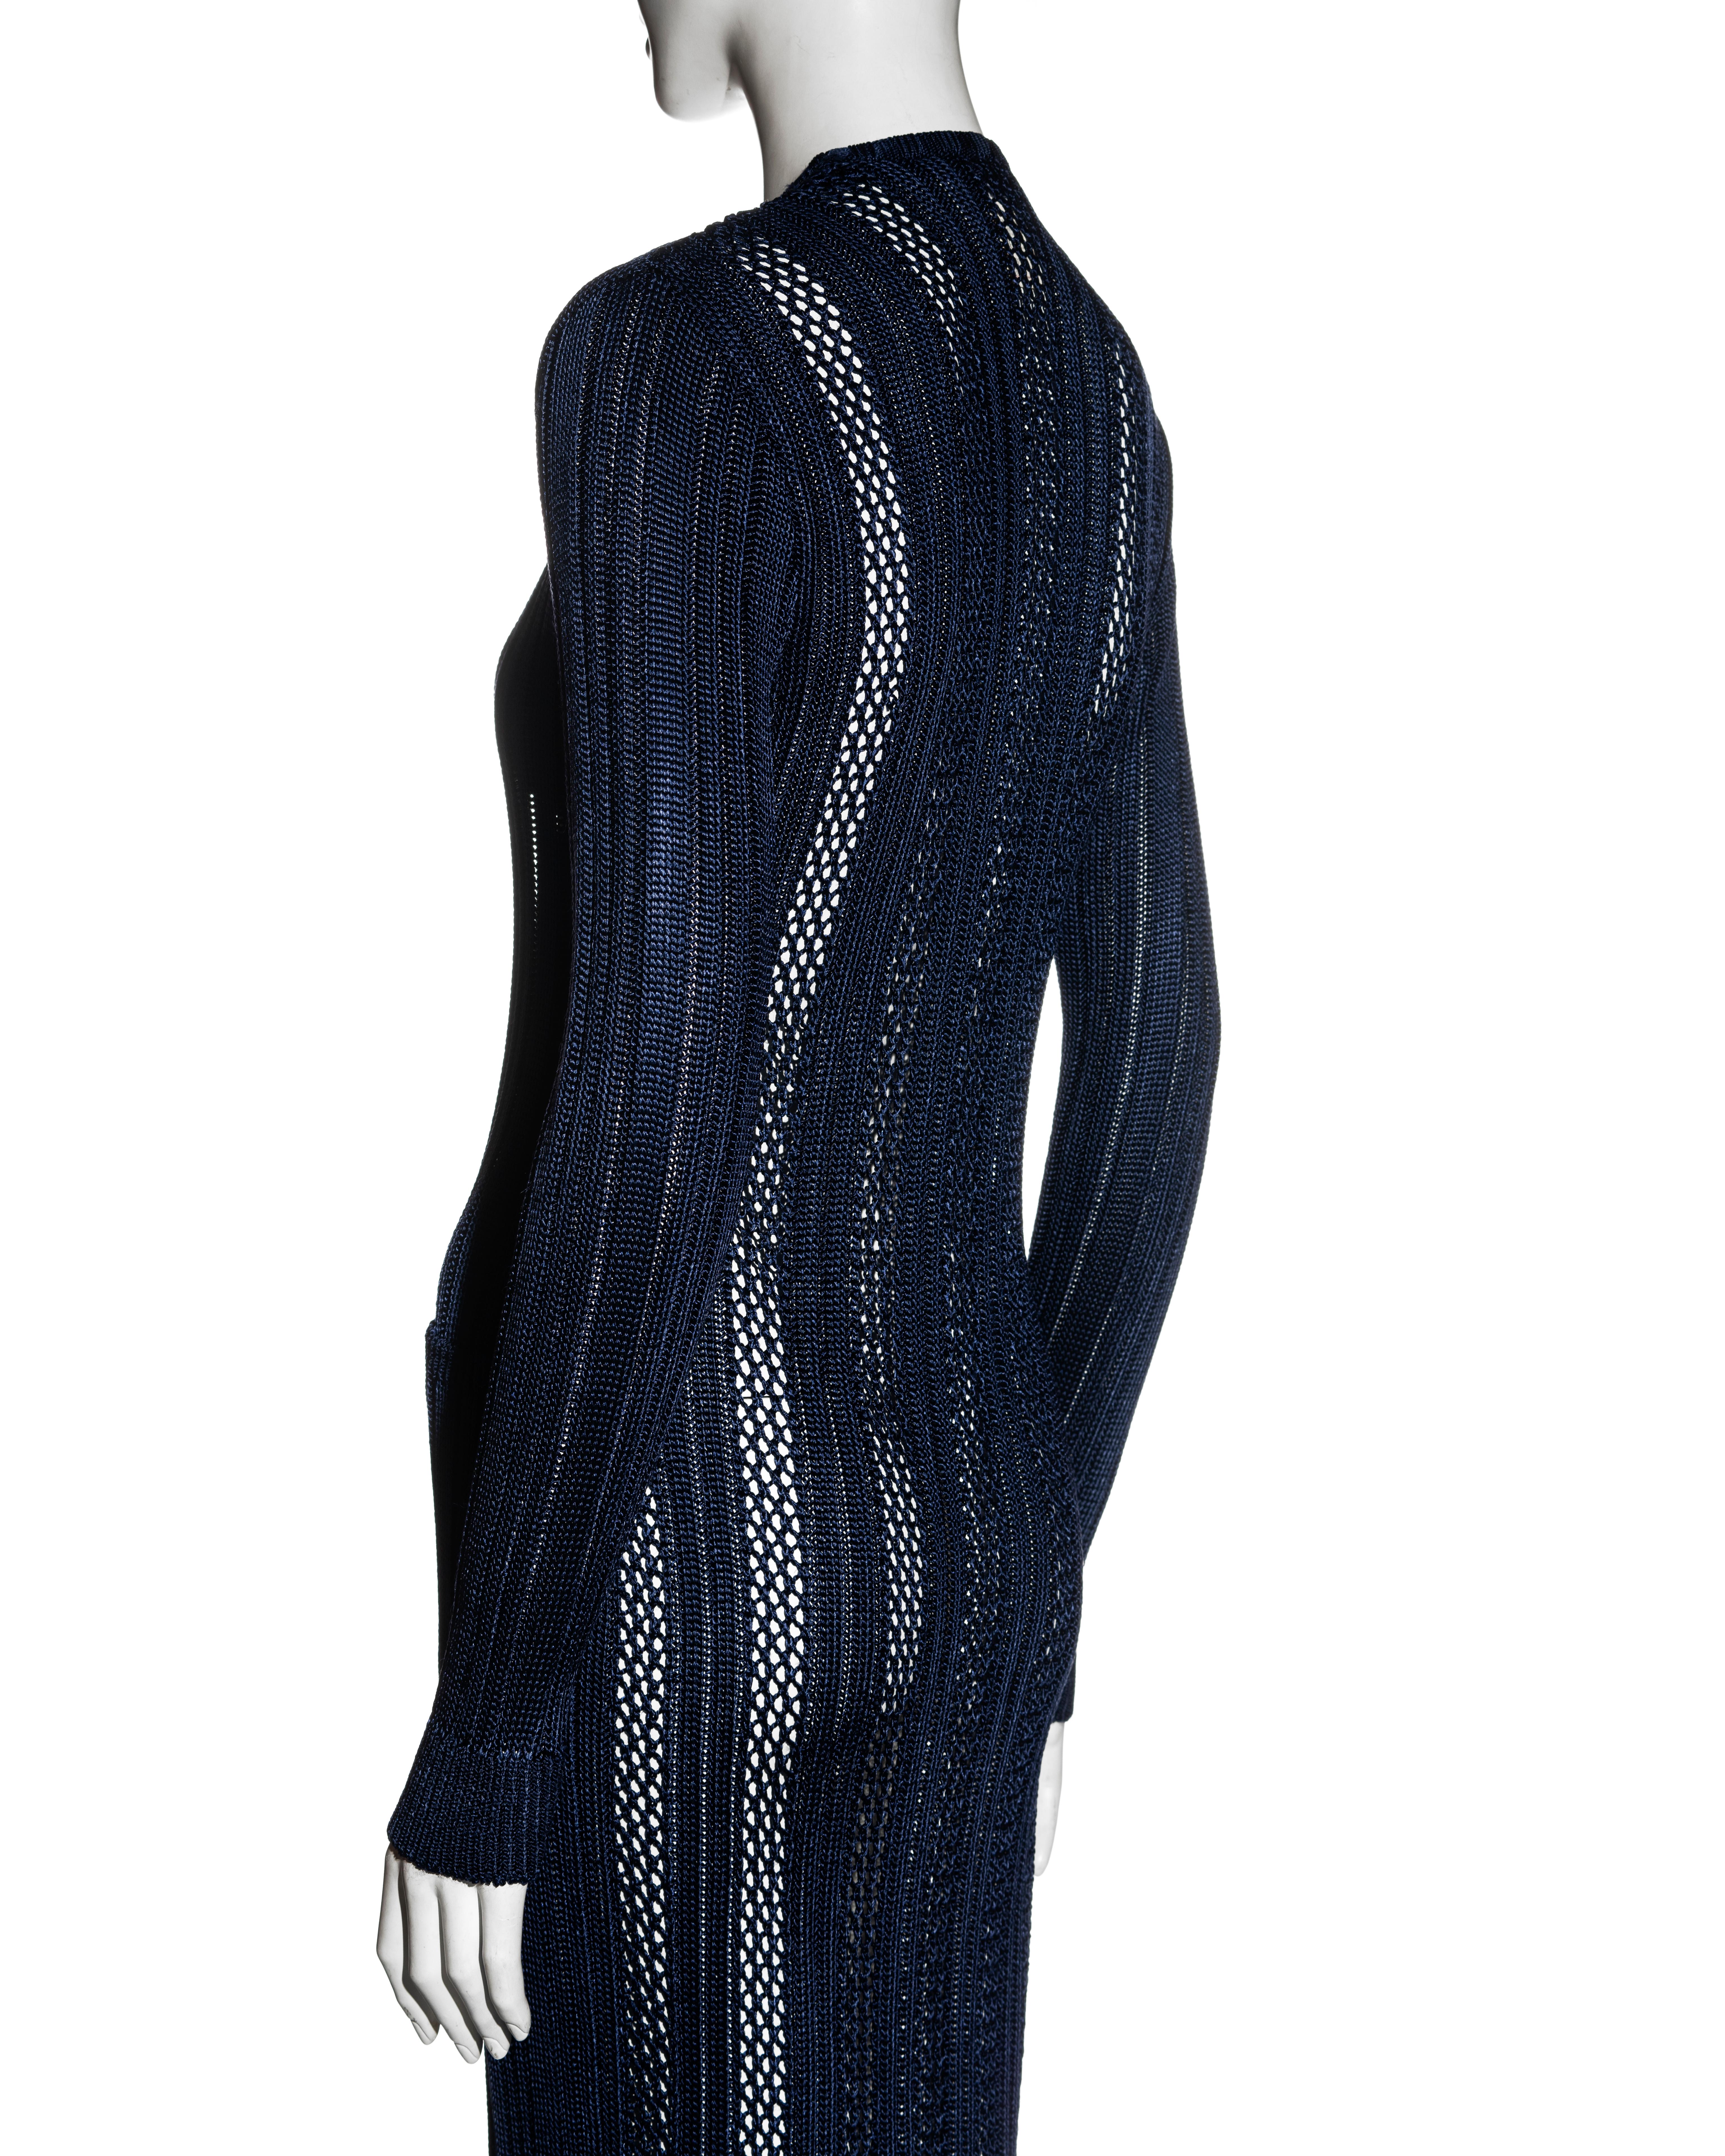 Gianni Versace navy blue open-knit bodycon dress and cardigan set, fw 1993 For Sale 6